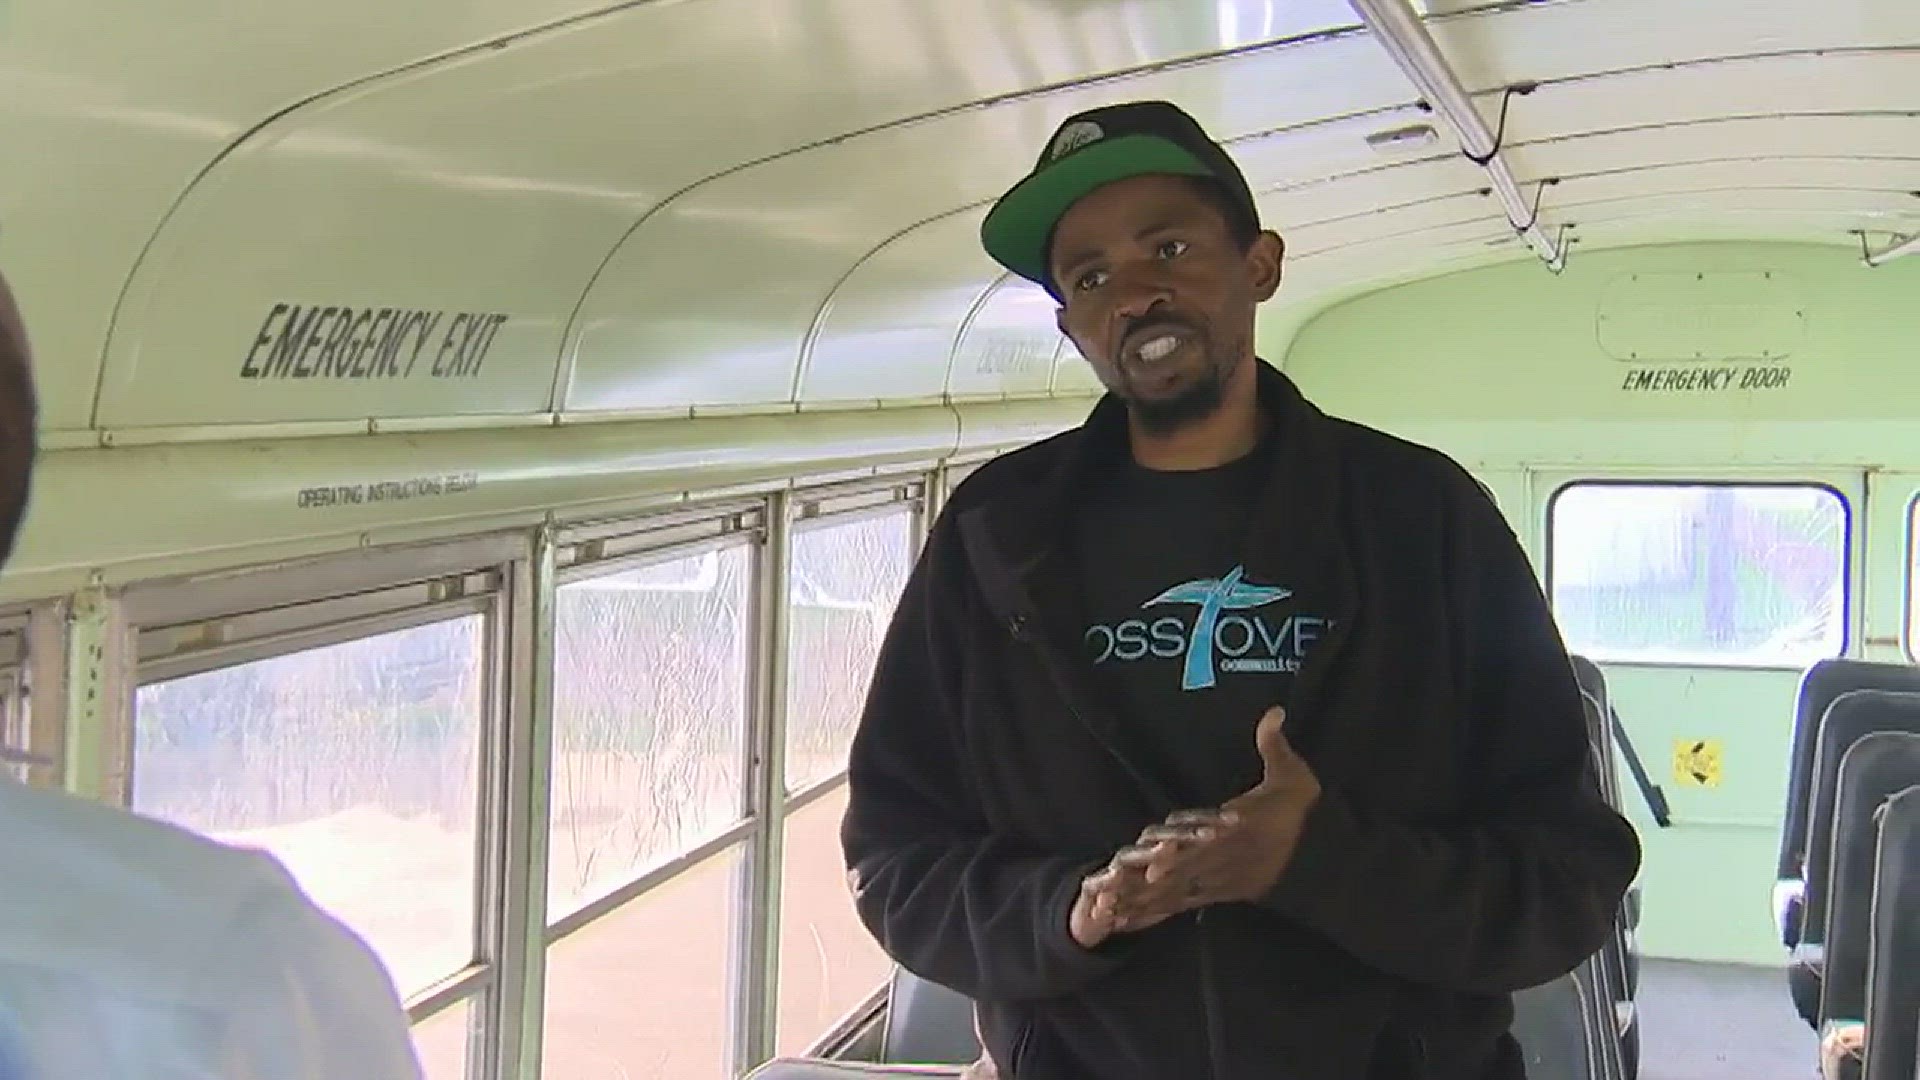 Owners of a church bus damaged by teenage vandals got surprising support from a school janitor.